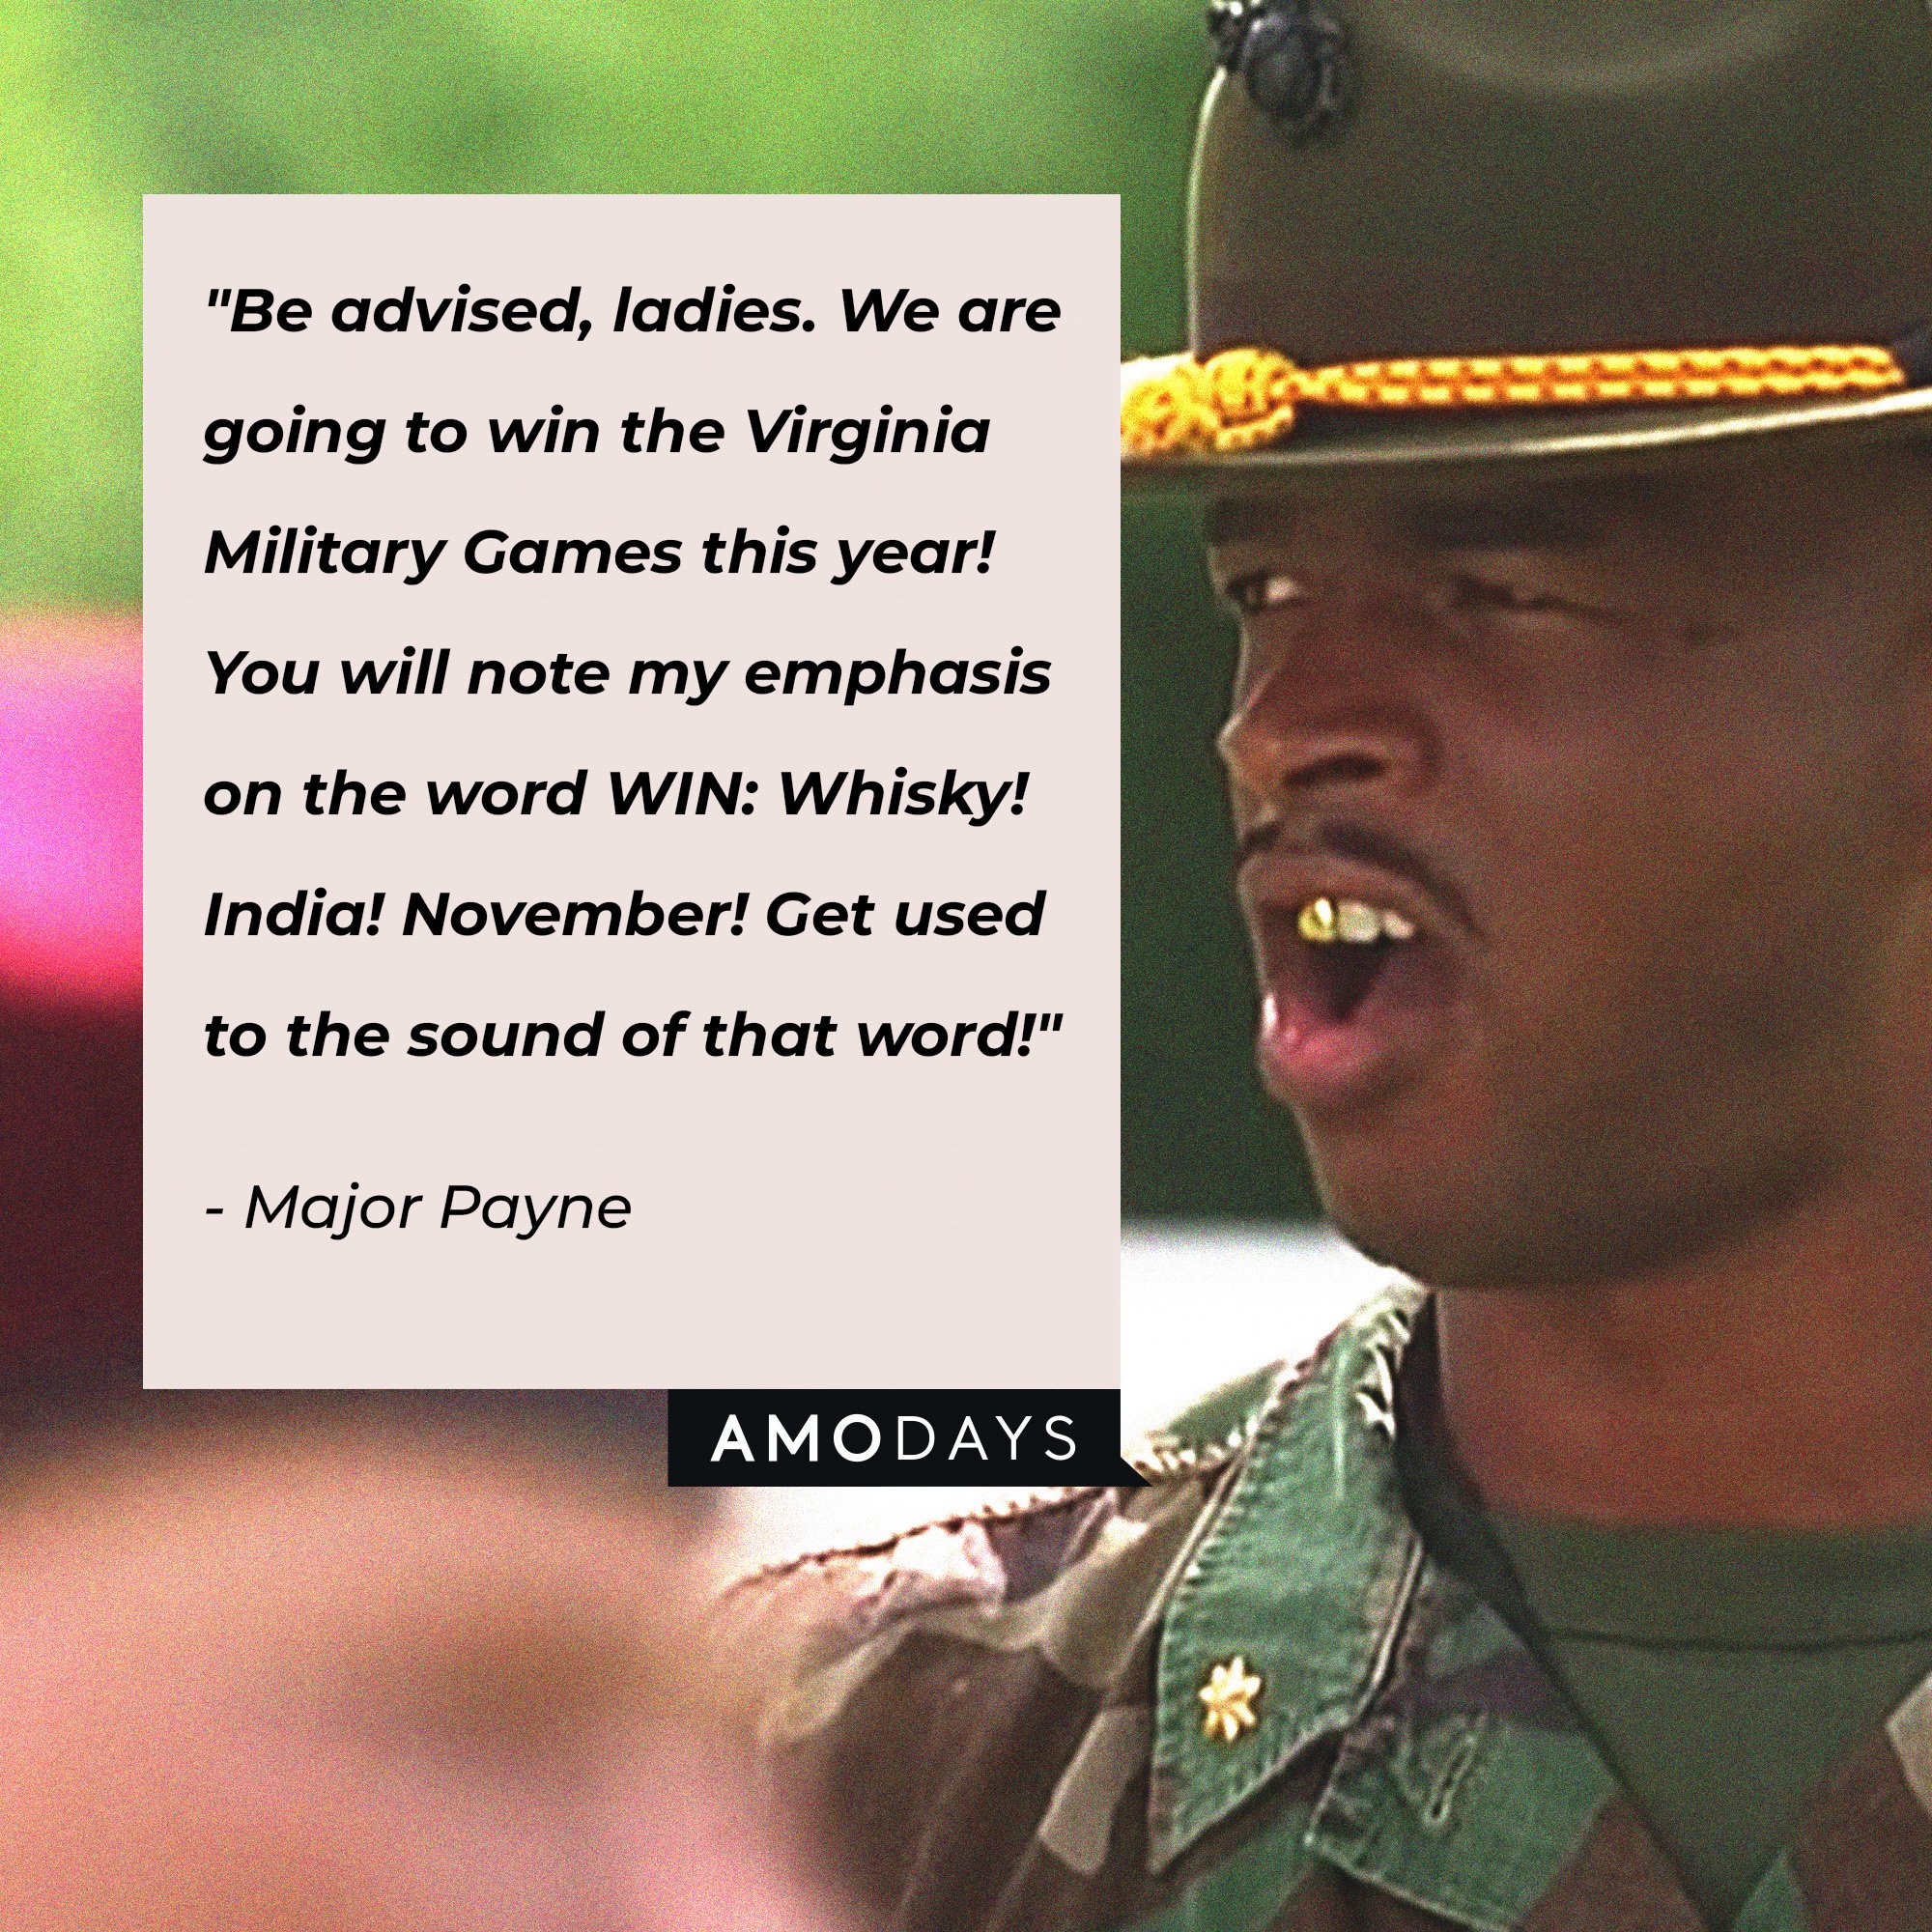 Major Payne's quote: "Be advised, ladies. We are going to win the Virginia Military Games this year! You will note my emphasis on the word WIN: Whisky! India! November! Get used to the sound of that word!" | Source: Amodays